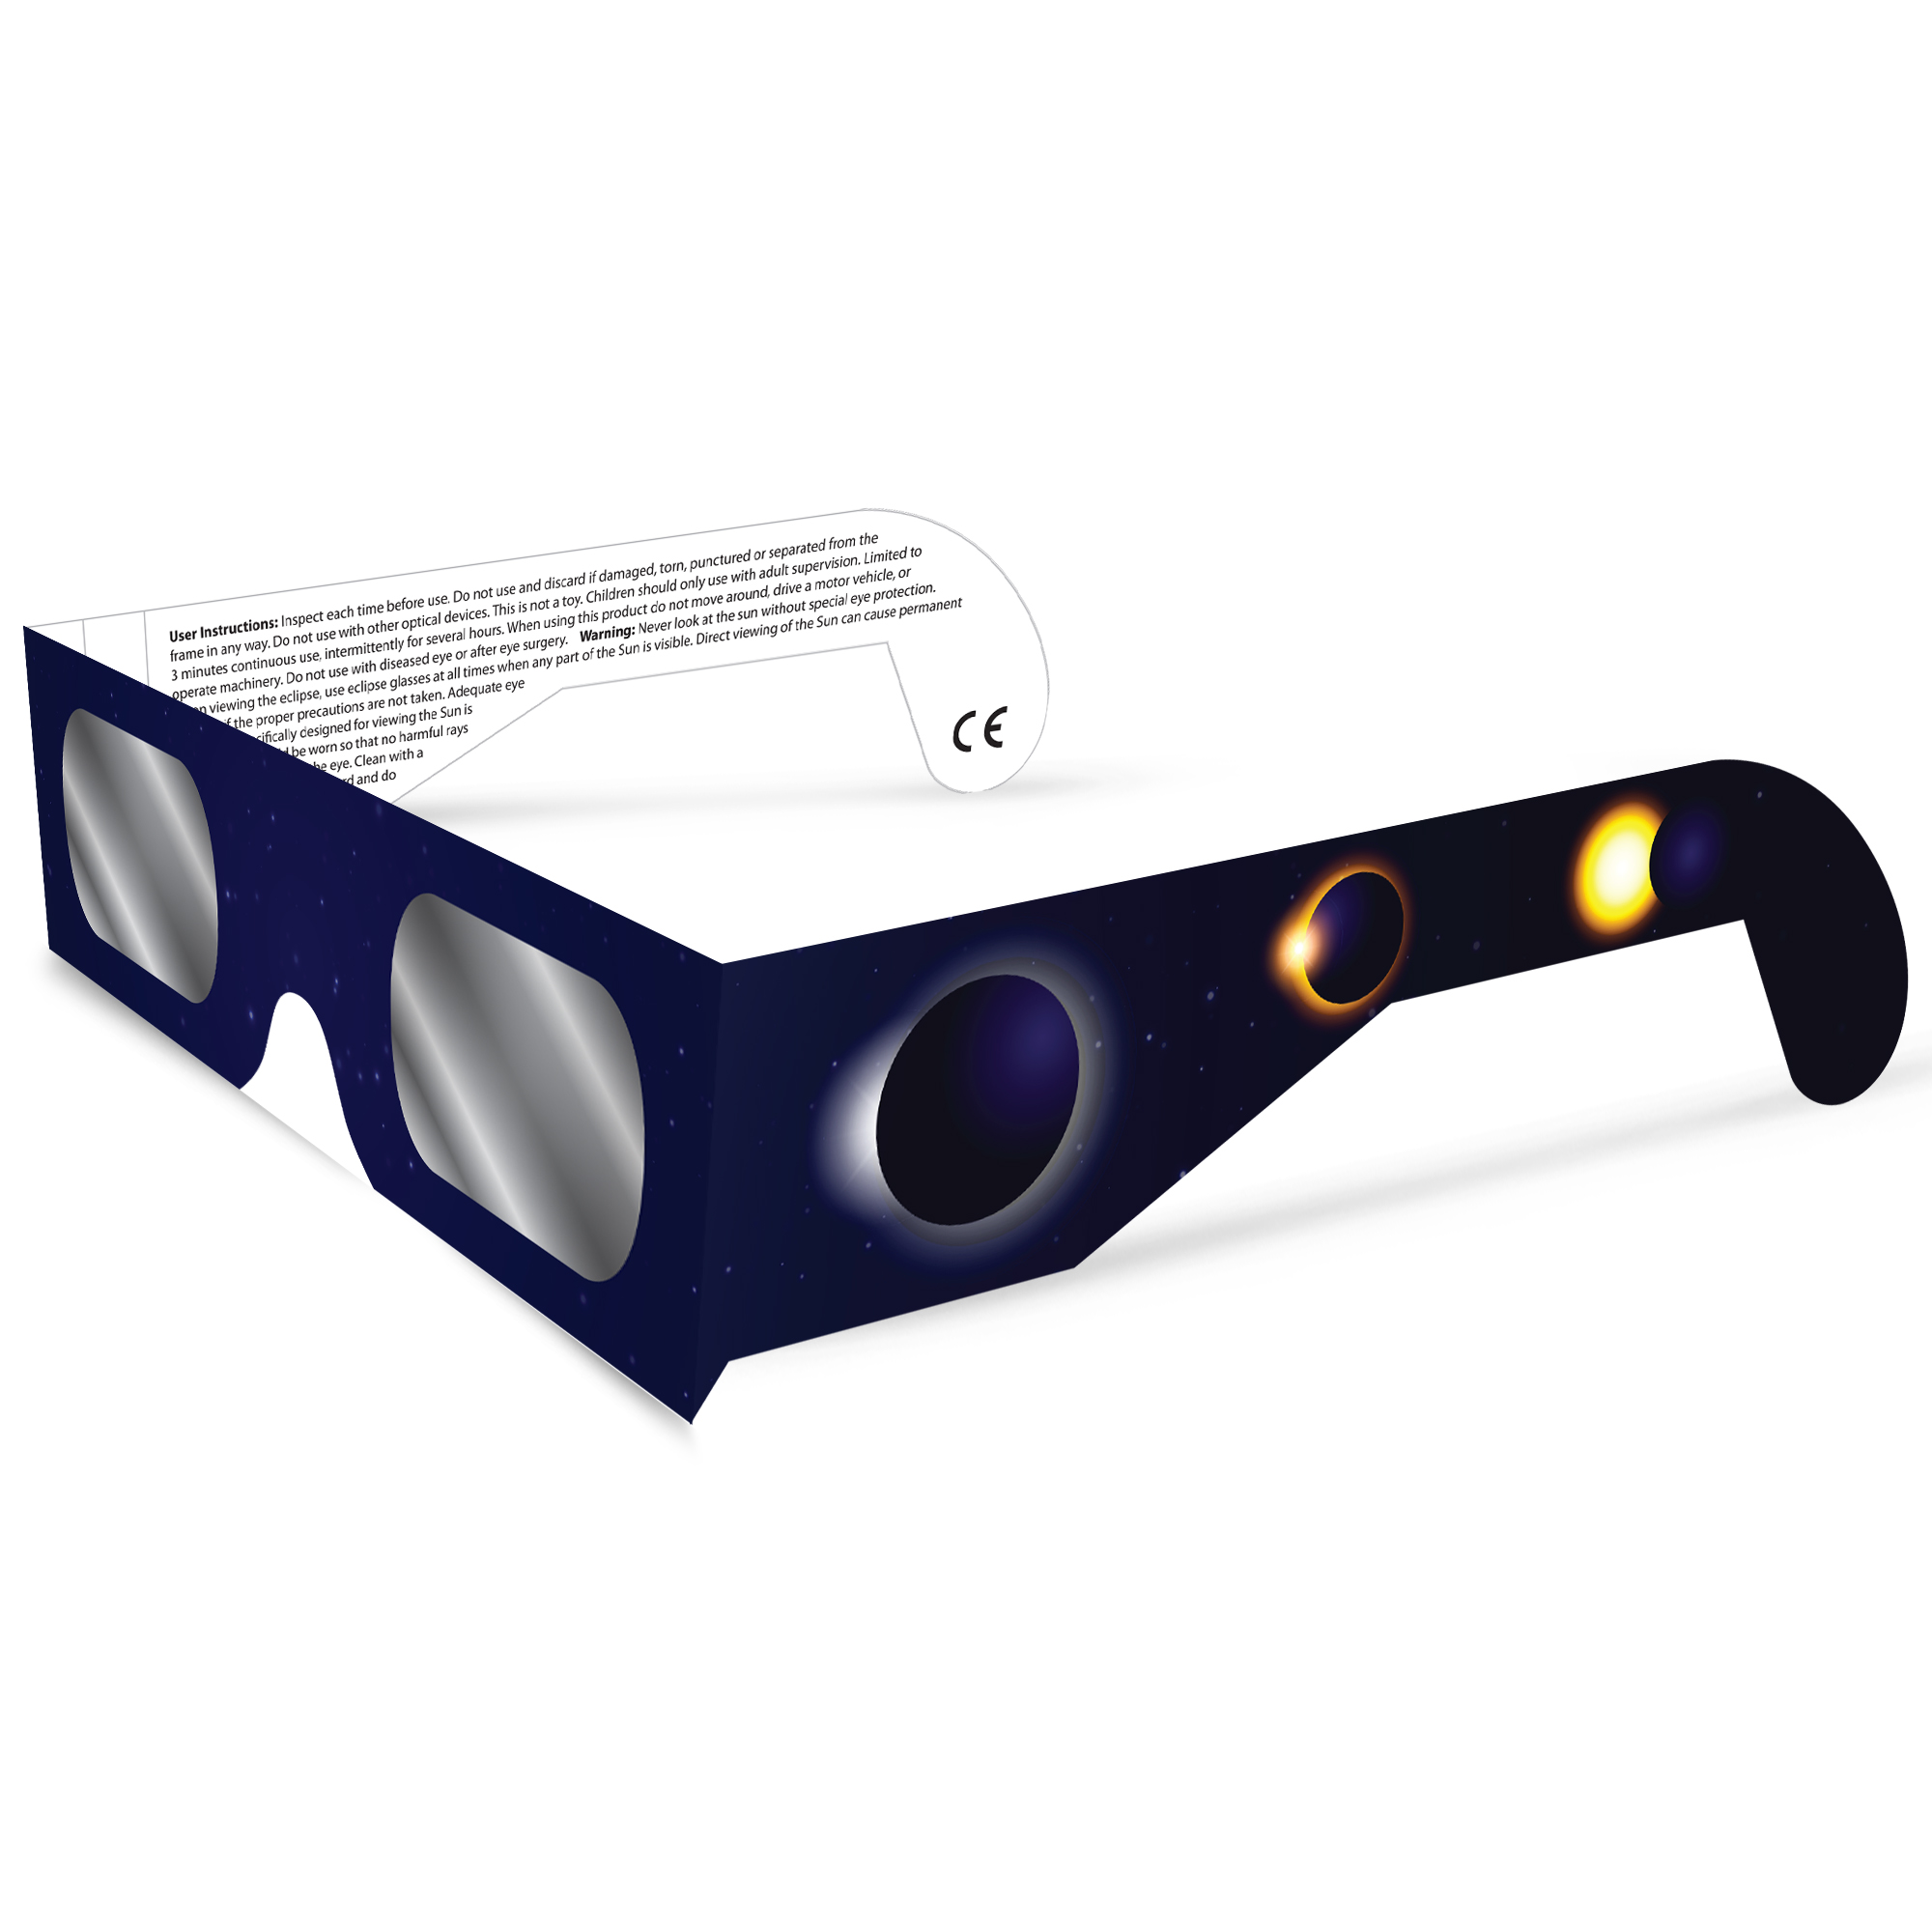 VisiSolar Solar Eclipse Glasses Made in USA (Pack of 5) CE ISO Certified NASA Approved Glasses - image 5 of 10